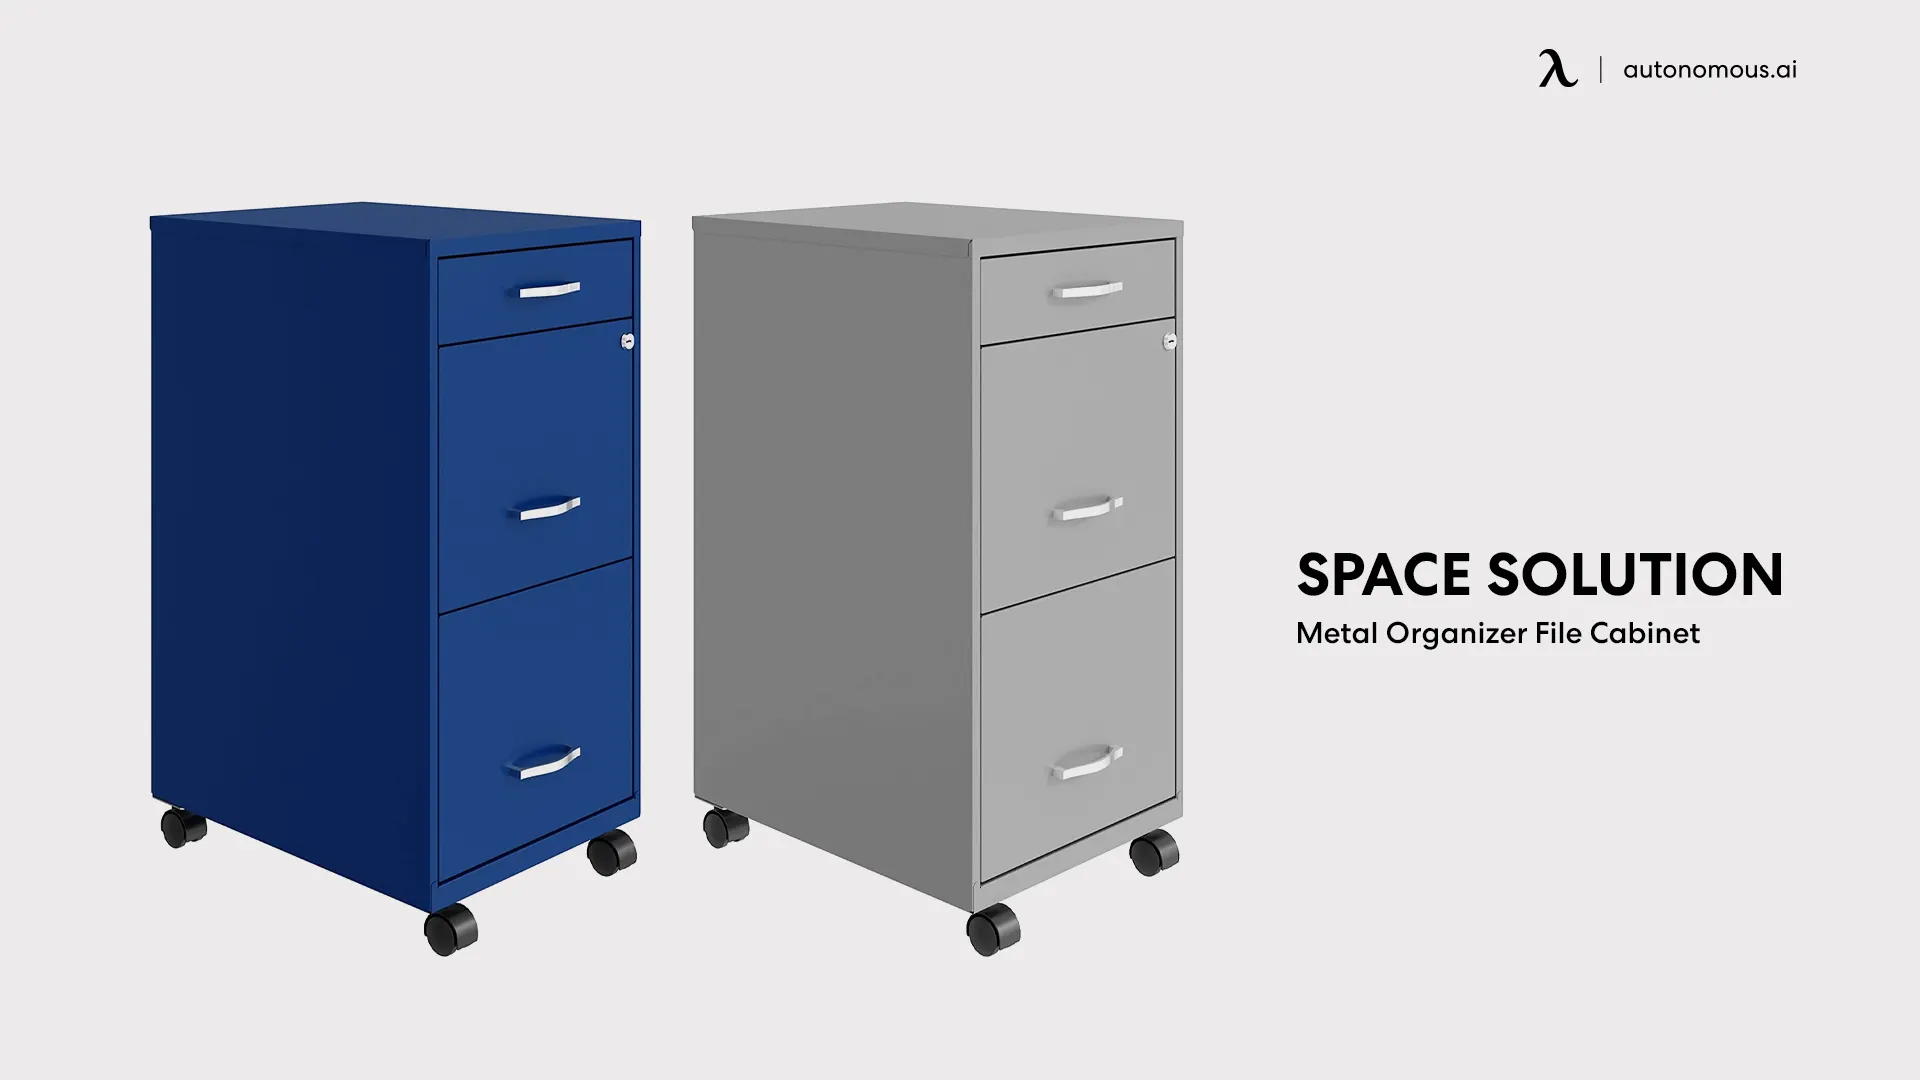 Space Solution Metal Organizer File Cabinet